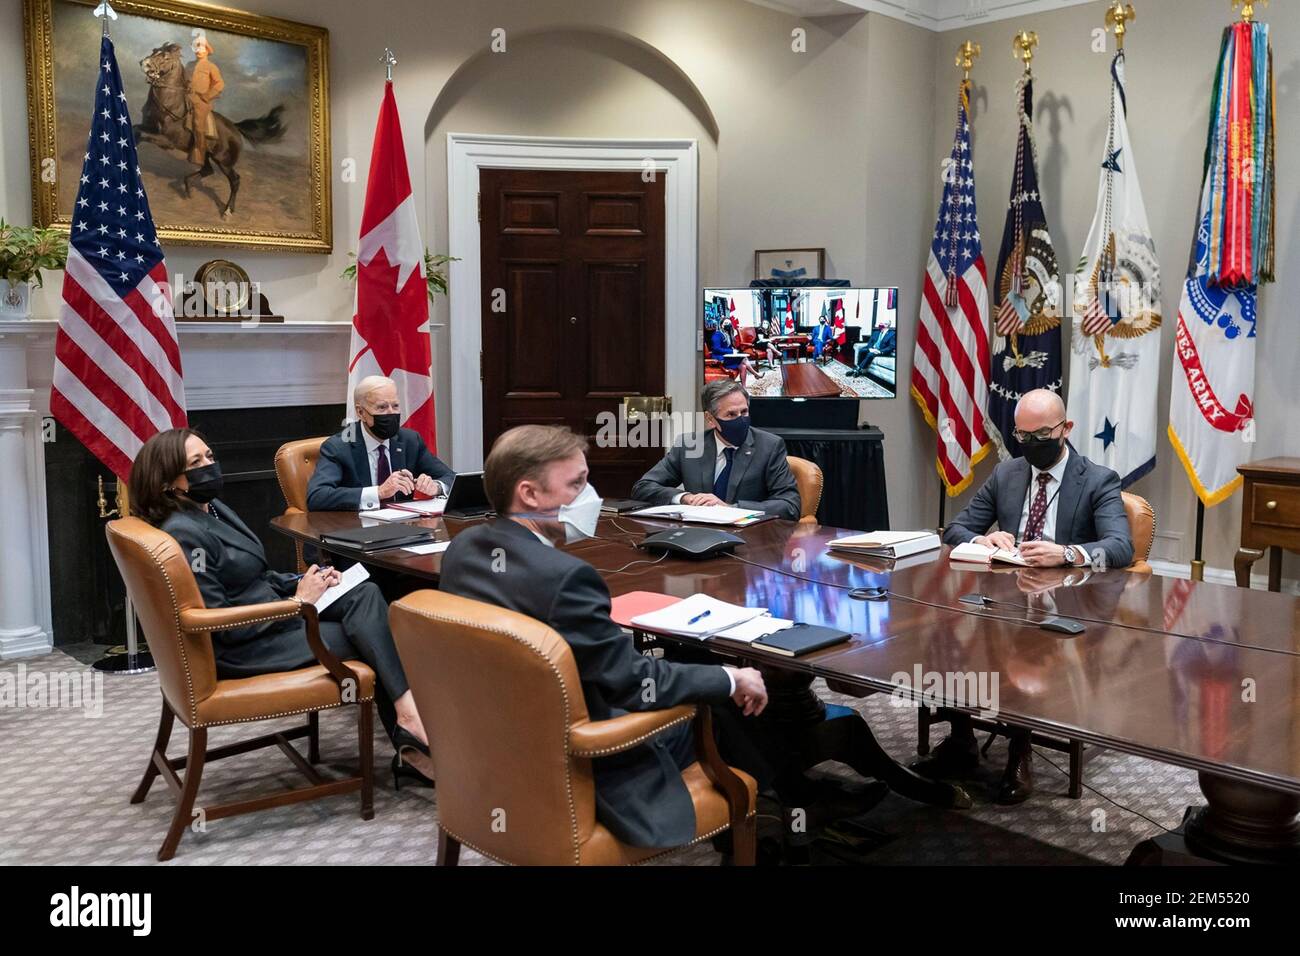 U.S President Joe Biden and Vice President Kamala Harris hold a video conference meeting with Canadian Prime Minister Justin Trudeau from the Roosevelt Room of the White House February 23, 2021 in Washington, D.C. Stock Photo